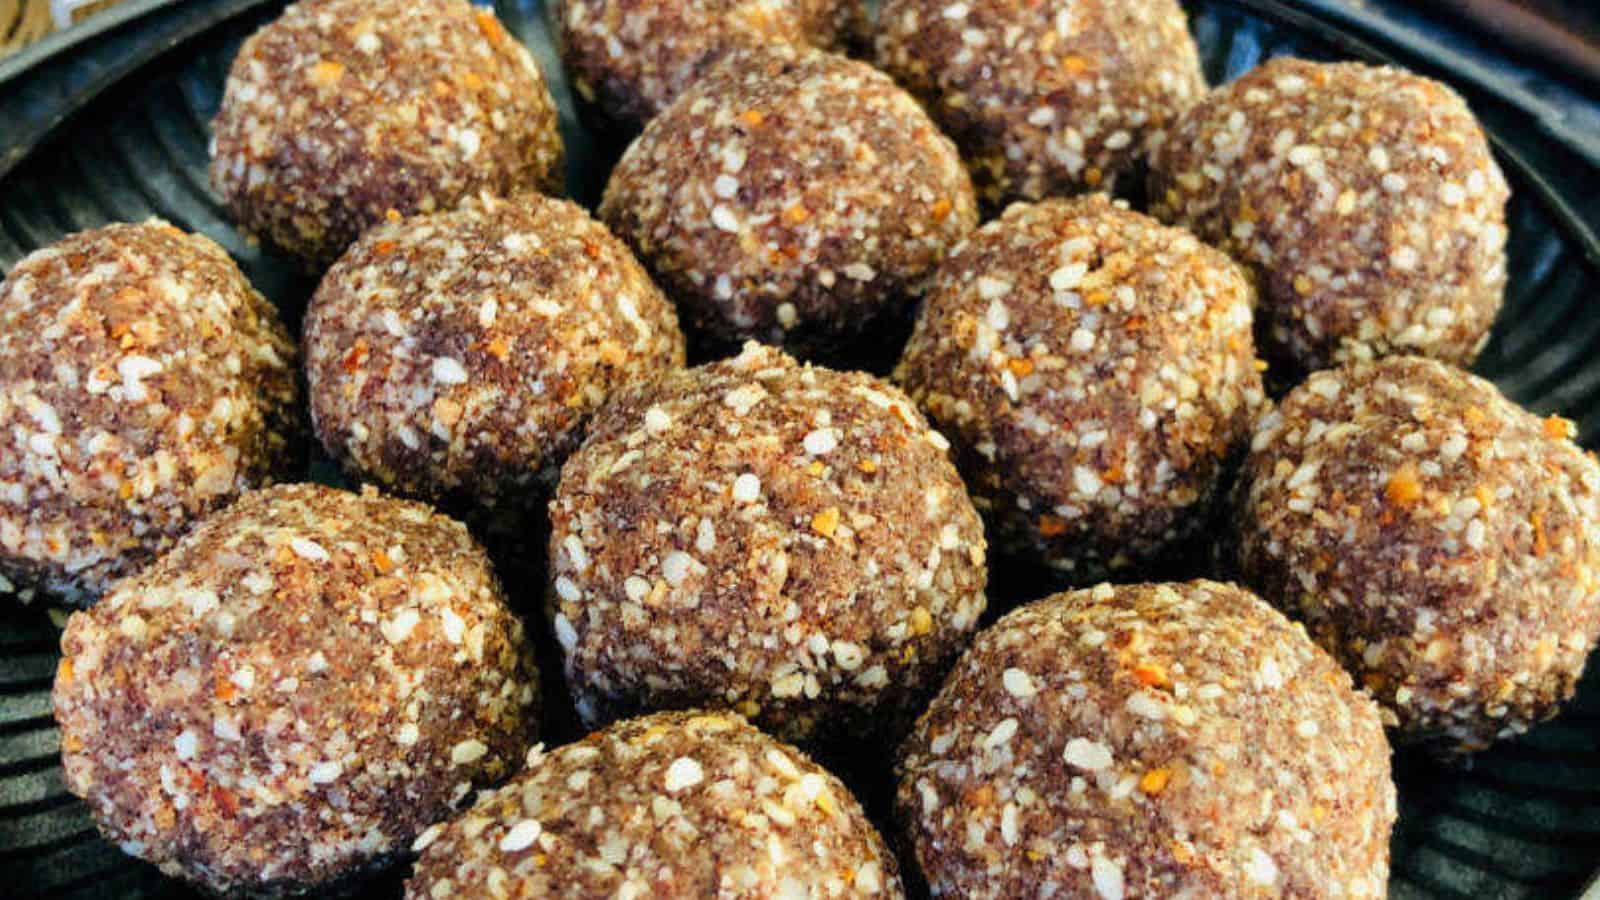 A close-up of a plate containing multiple spherical, textured sweet balls made from sesame seeds and groundnuts.